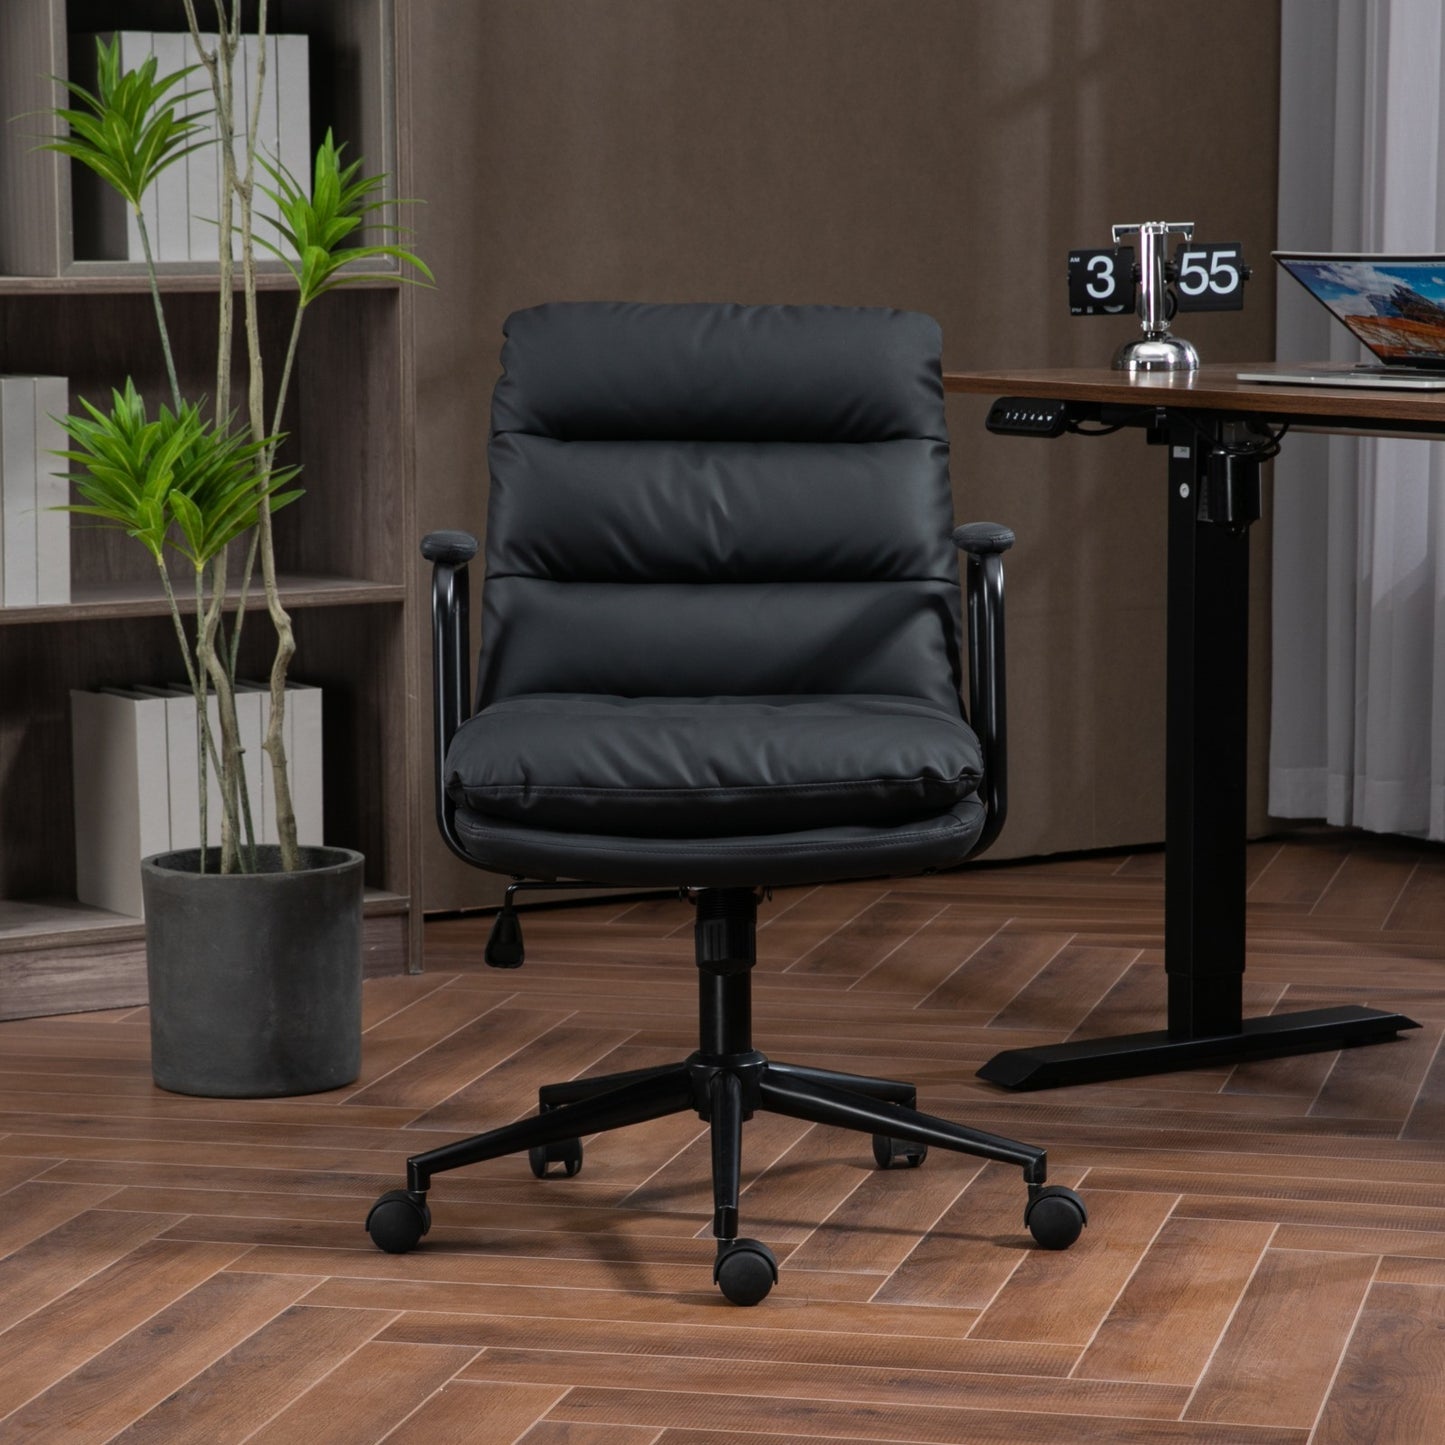 Office Chair,Mid Back Home Office Desk Task Chair with Wheels and Arms Ergonomic PU Leather Computer Rolling Swivel Chair with Padded Armrest,The back of the chair can recline 40° (Black)